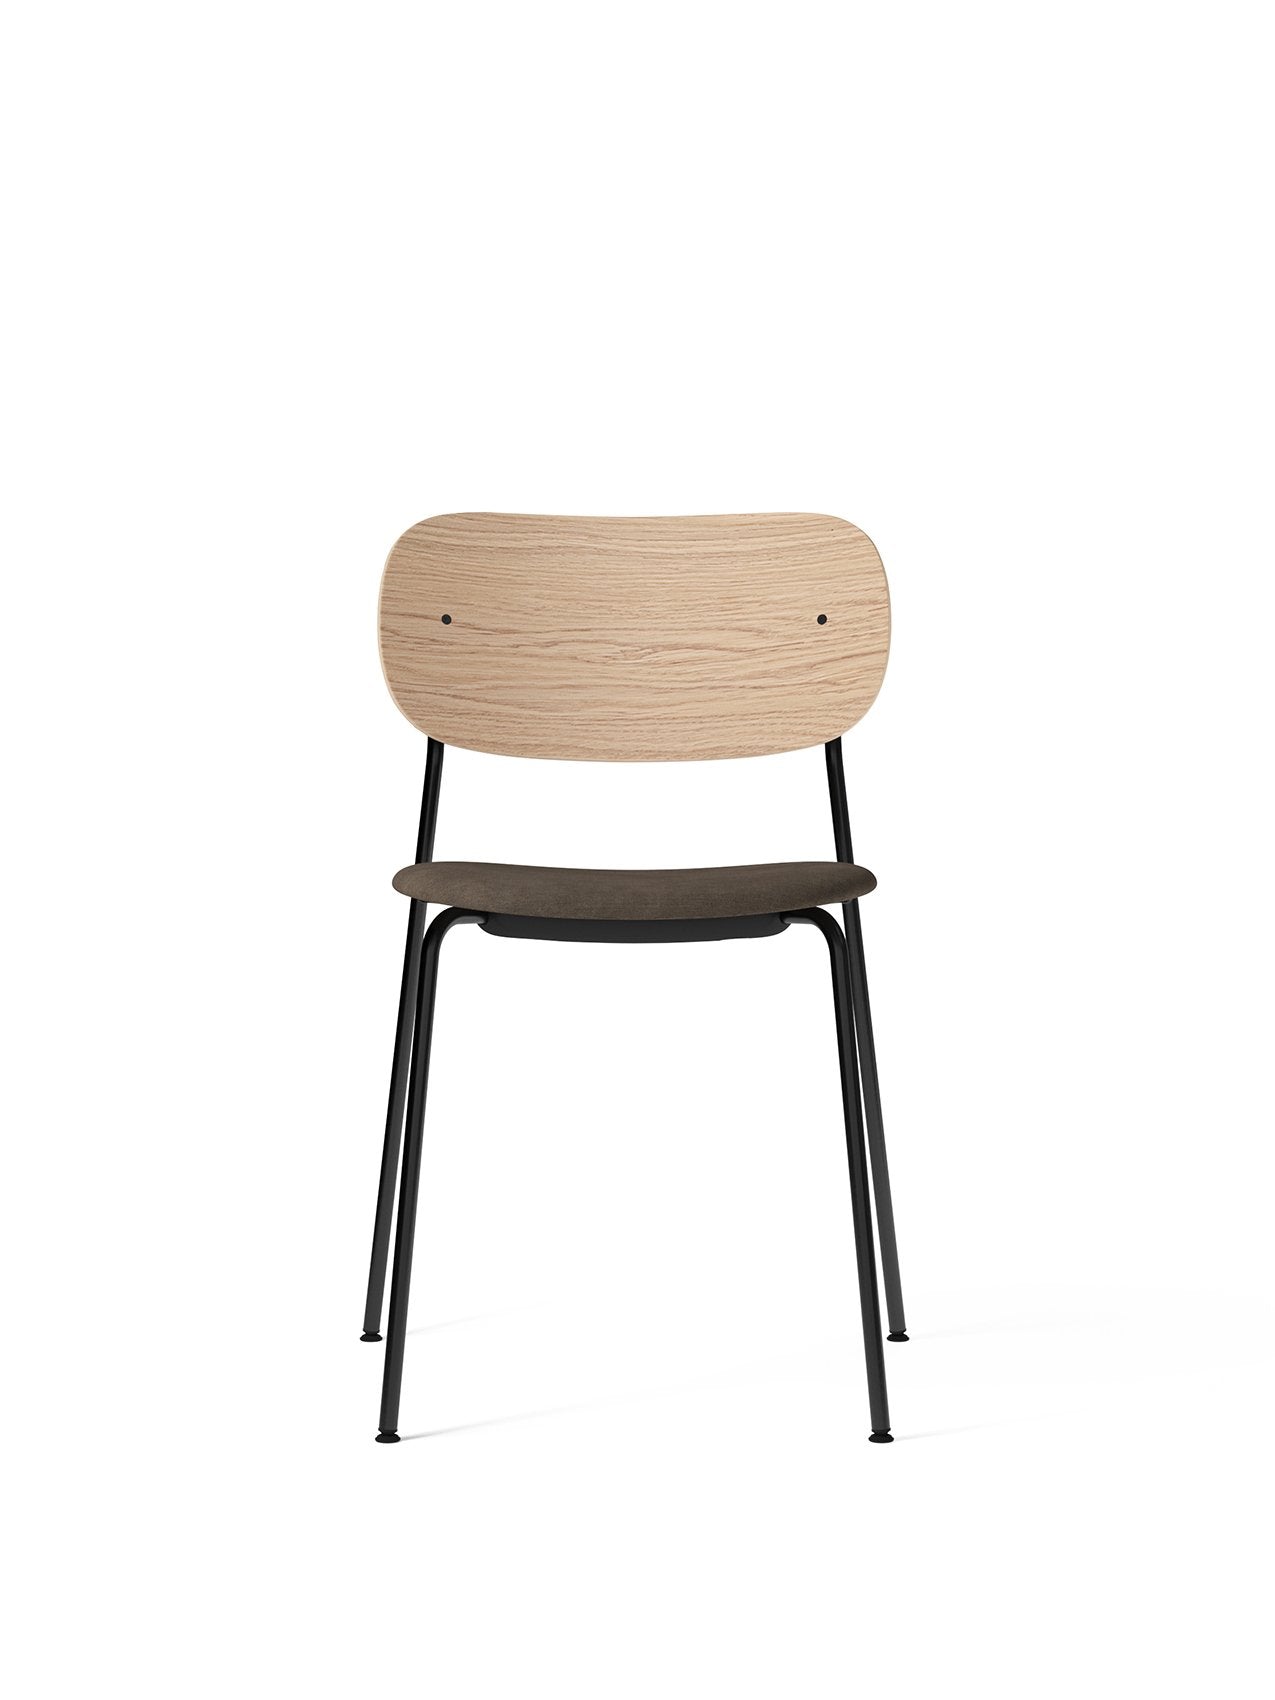 Co Chair, Upholstered-Chair-MENU Design Shop